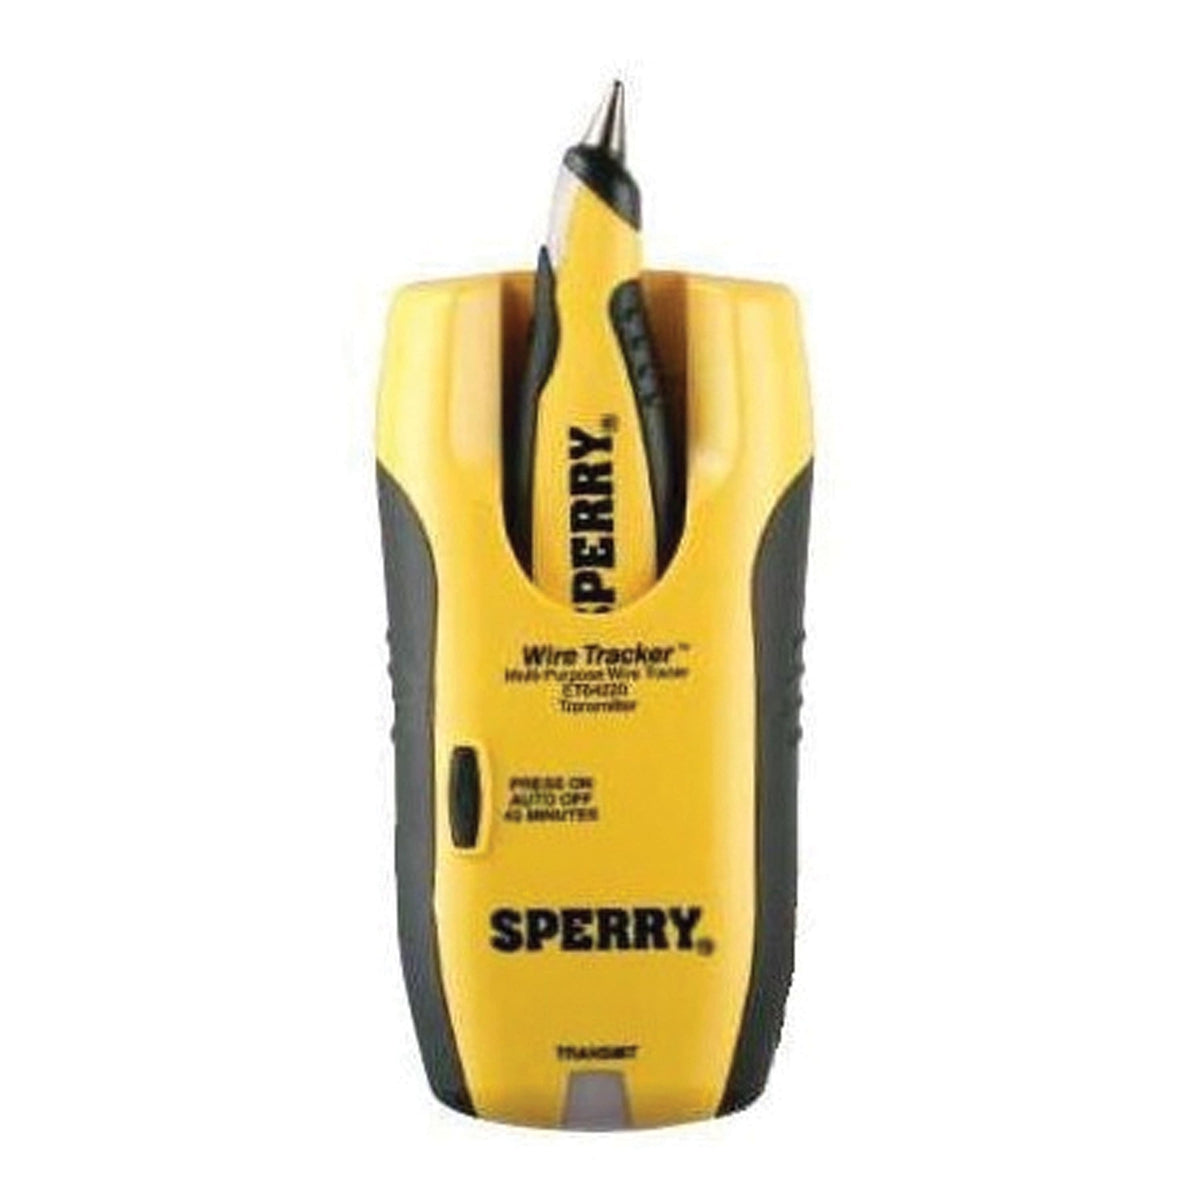 SPERRY Qualifies for Free Shipping SPERRY Wire Tracker #ET64220